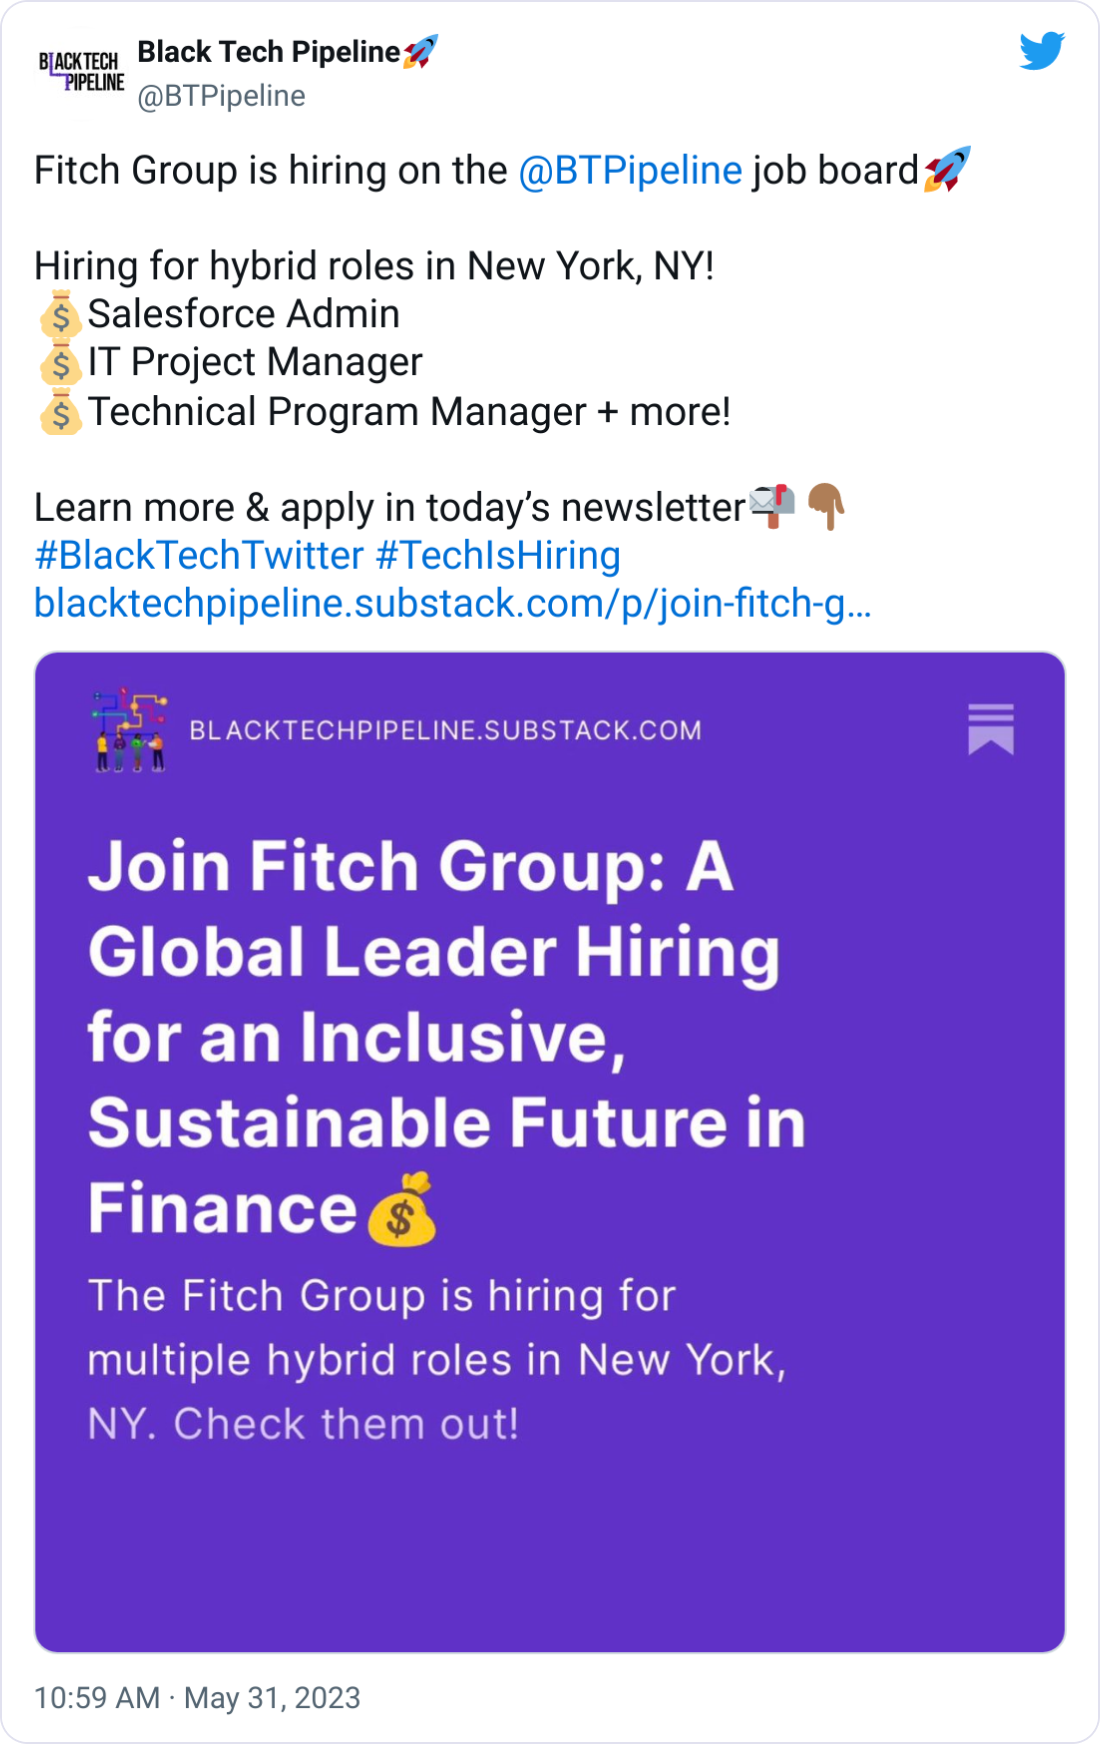 Black Tech Pipeline🚀 @BTPipeline Fitch Group is hiring on the  @BTPipeline  job board🚀  Hiring for hybrid roles in New York, NY! 💰Salesforce Admin 💰IT Project Manager 💰Technical Program Manager + more!  Learn more & apply in today’s newsletter📬👇🏾 #BlackTechTwitter #TechIsHiring https://blacktechpipeline.substack.com/p/join-fitch-group-a-global-leader